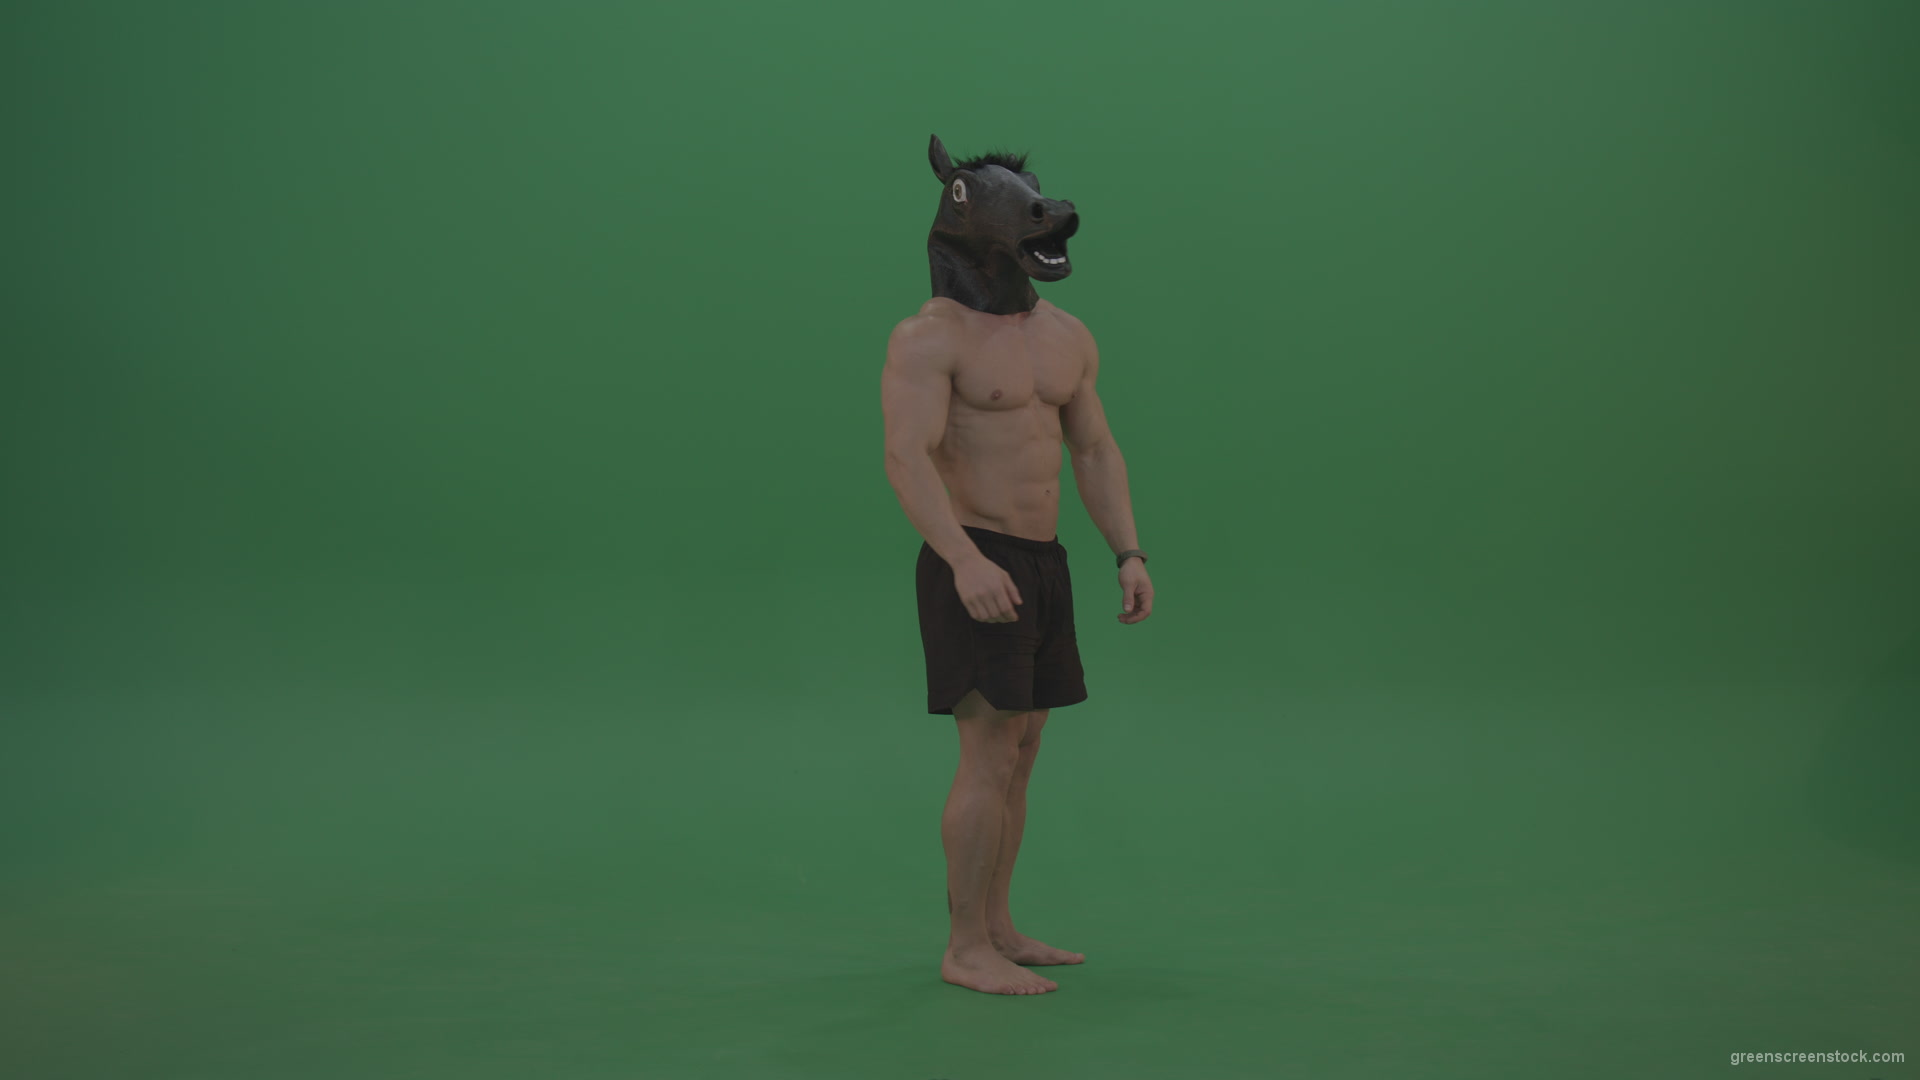 Ripped-man-with-horse-head-displays-body-over-chromakey-background_002 Green Screen Stock